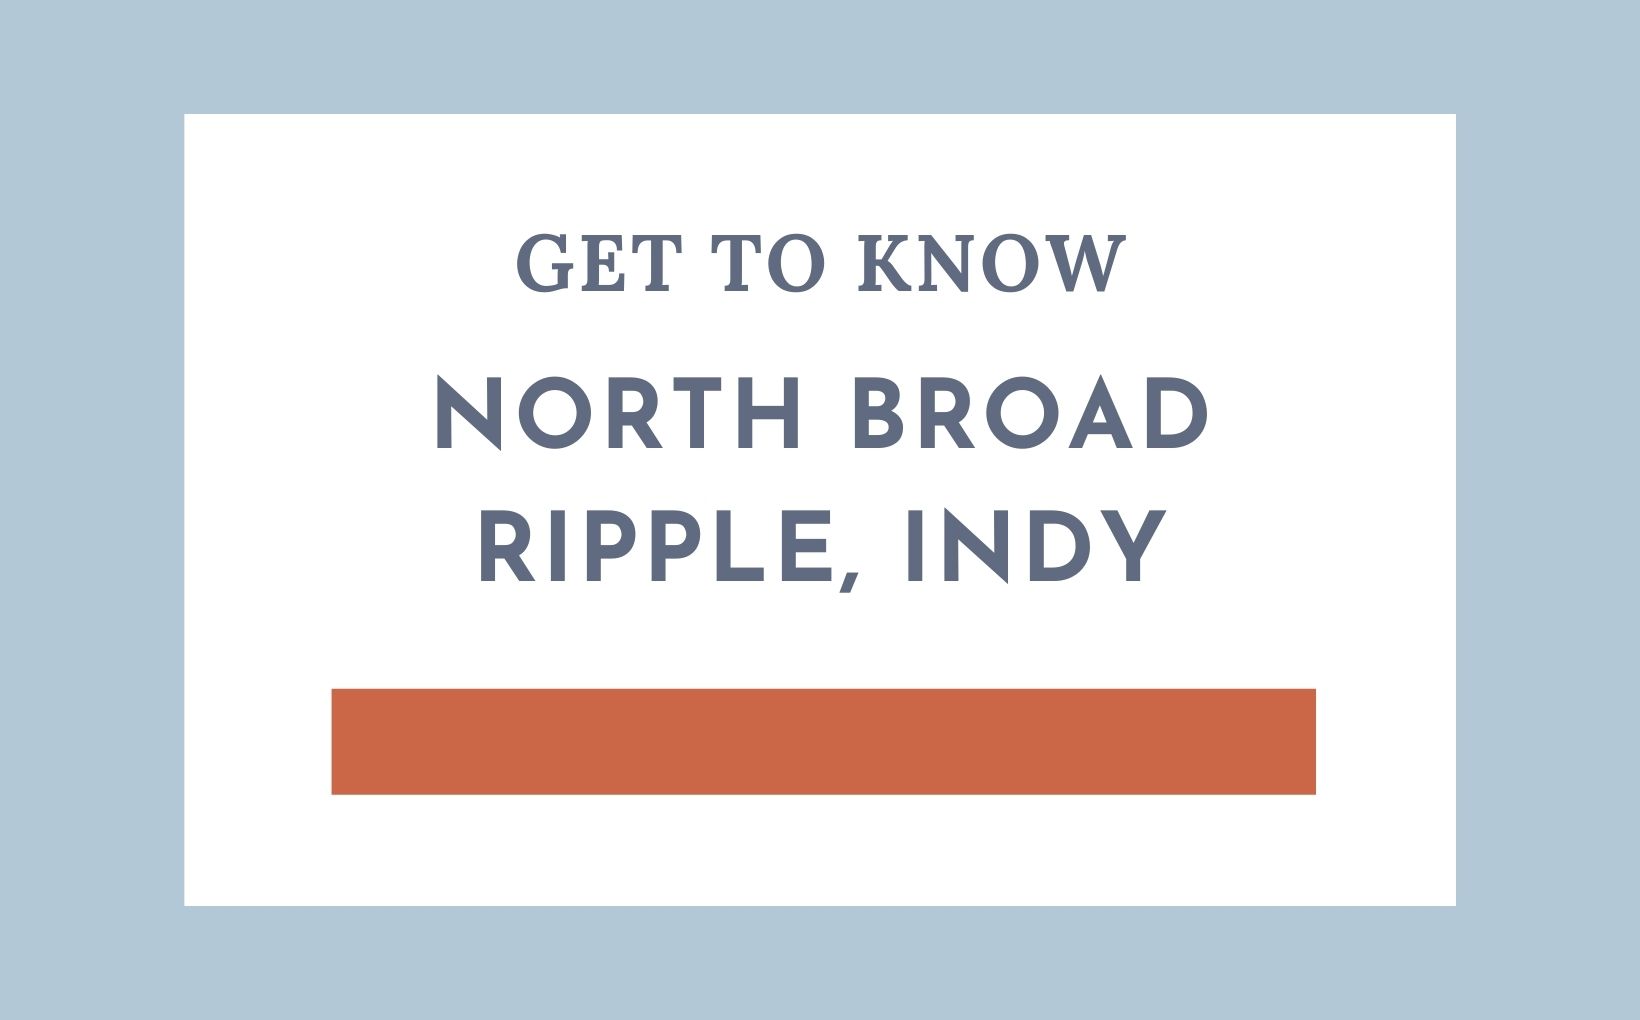 North Broad Ripple Indianapolis feature image